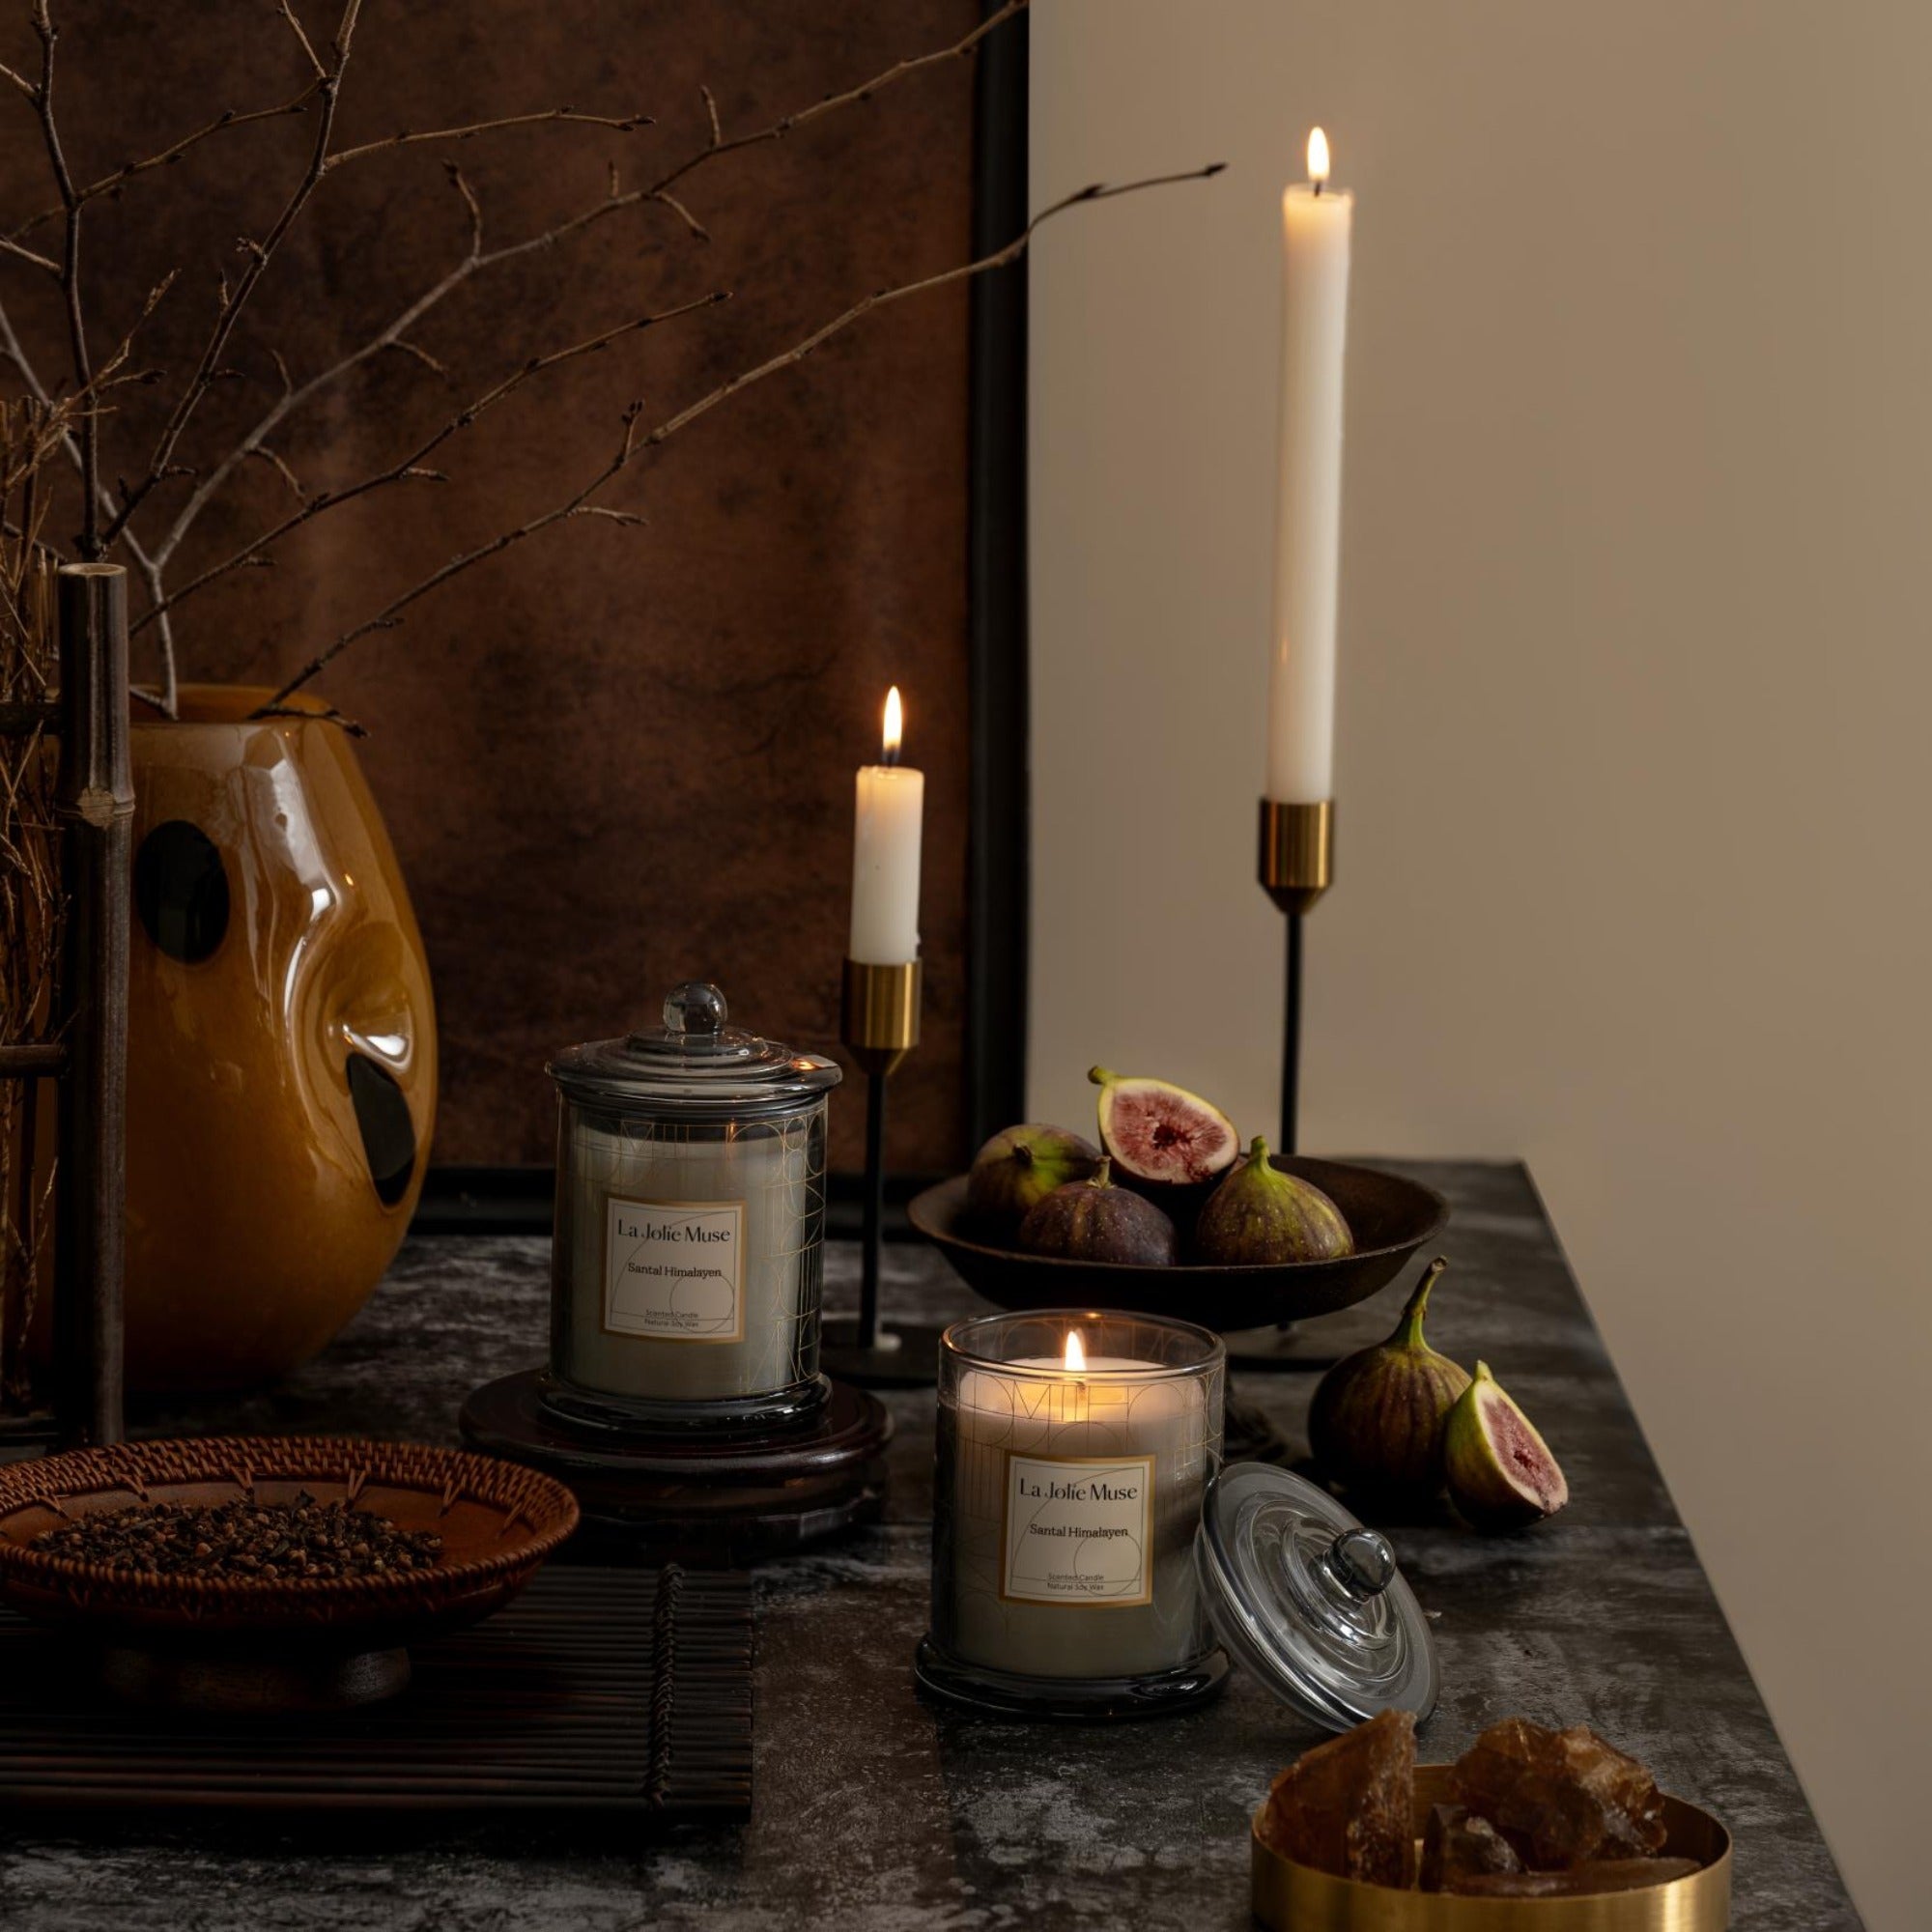  Photo shot of lit Roesia - Santal Himalayen 10oz candles placed on a marble table, surrounded by figs, candleholders, and a vase